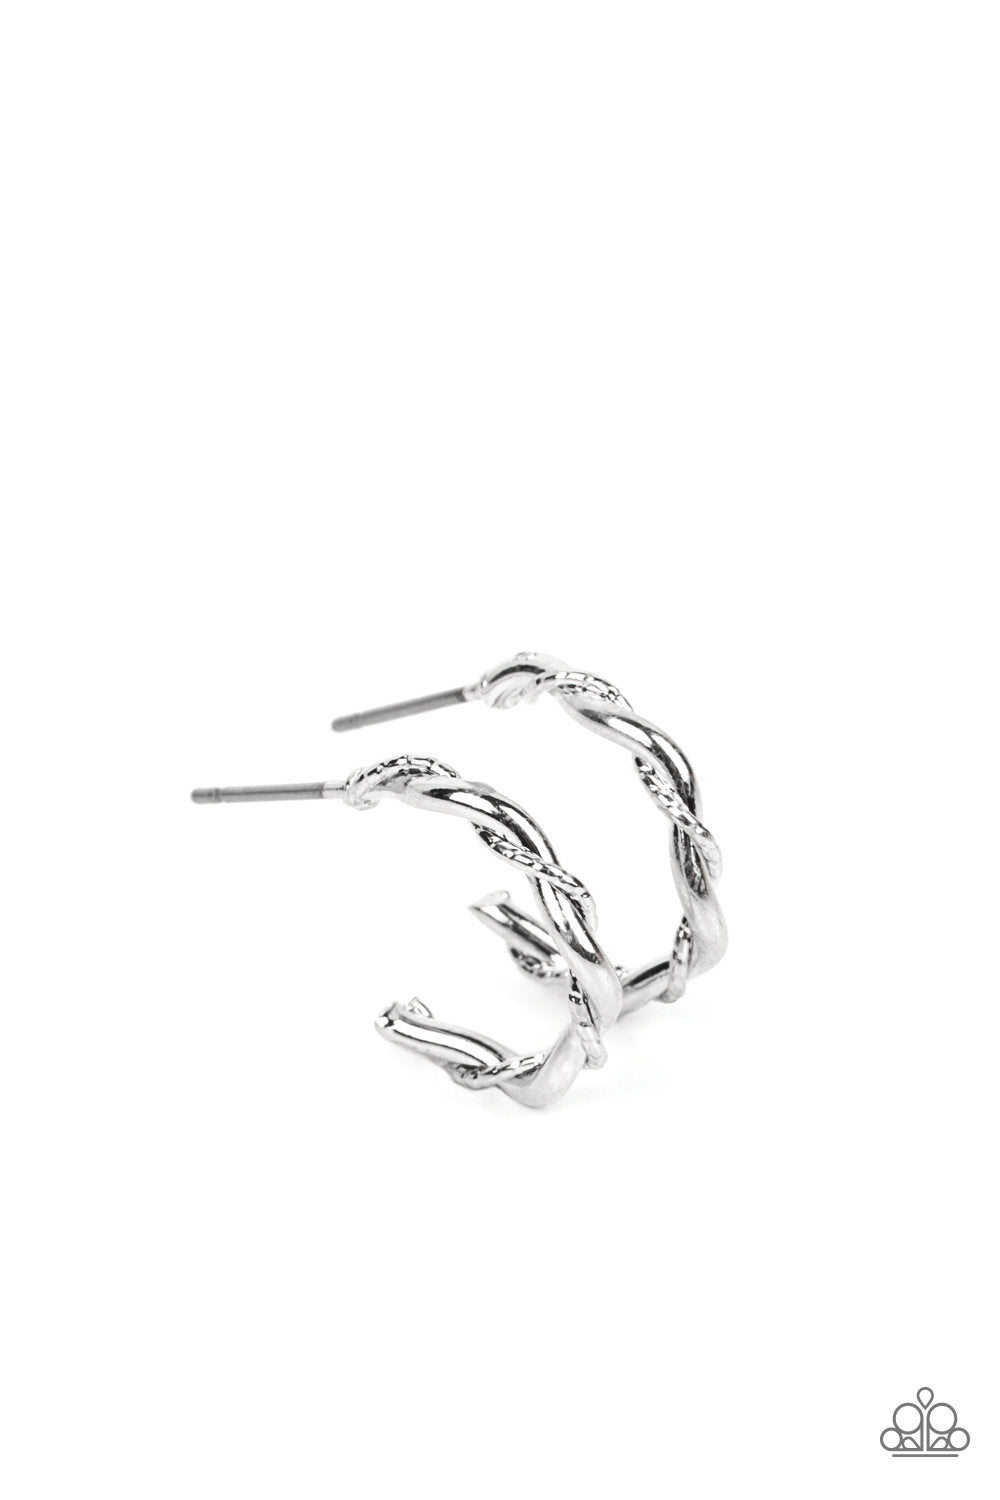 Paparazzi Irresistibly Intertwined - Silver Earrings